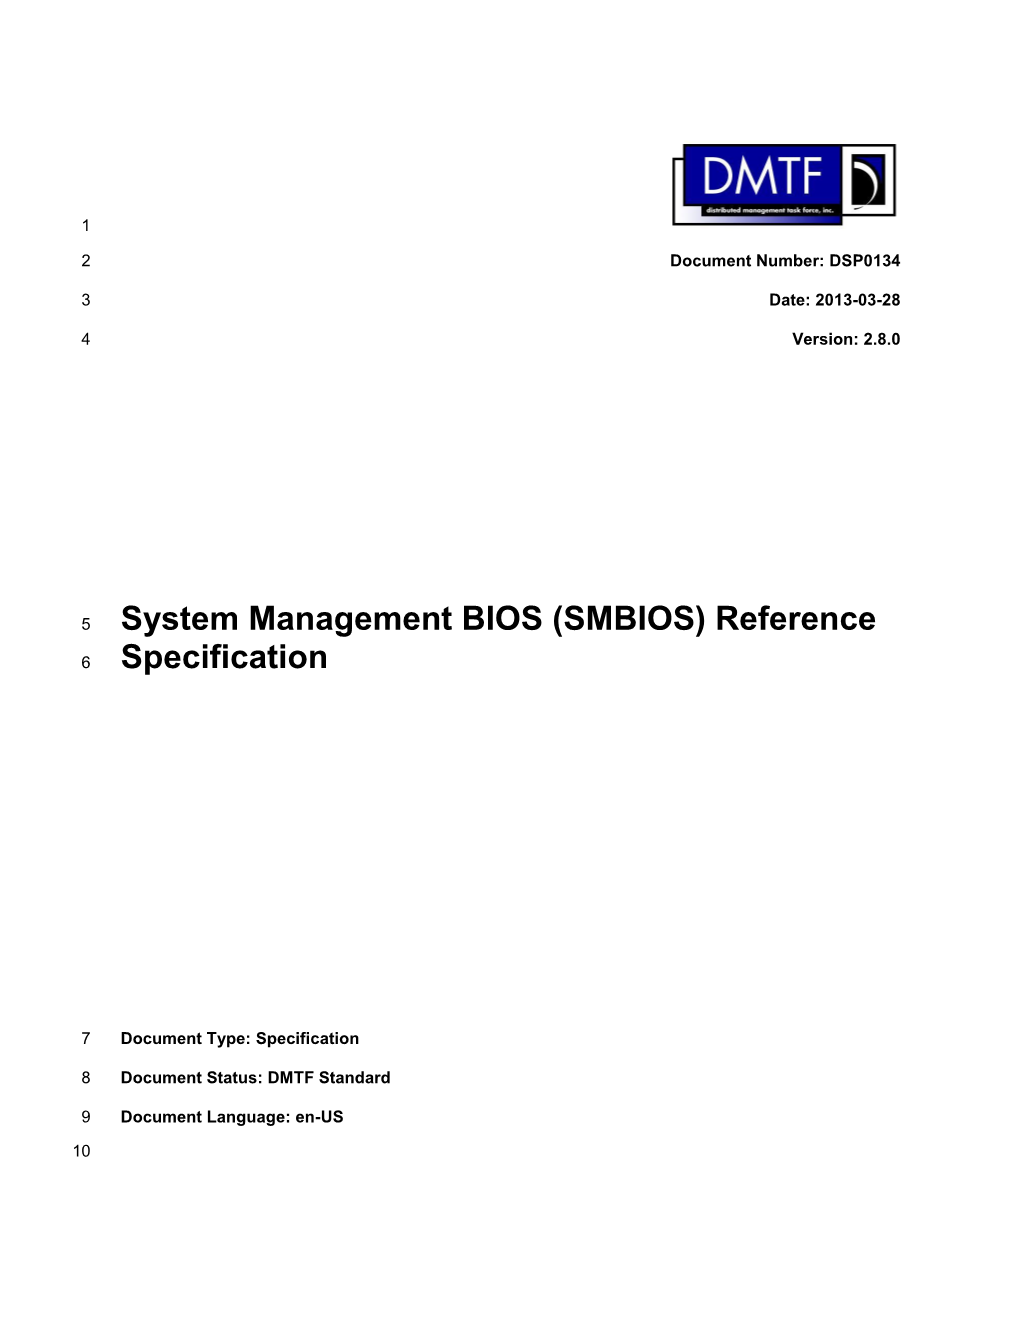 SMBIOS Specification